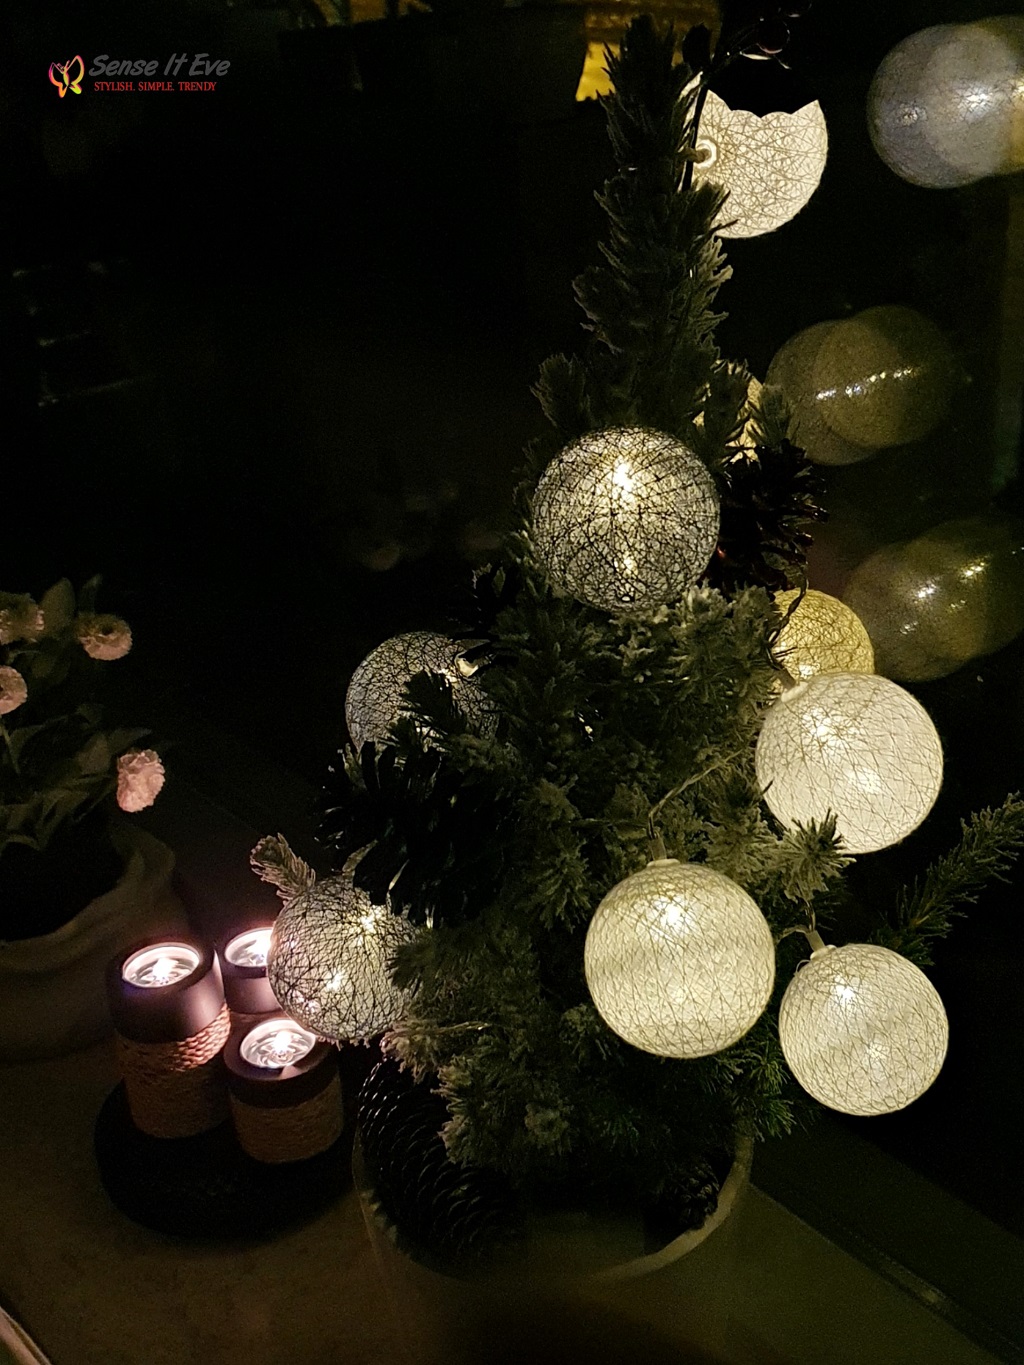 Christmas Tree Sense It Eve Tips that Help when Decorating for Christmas